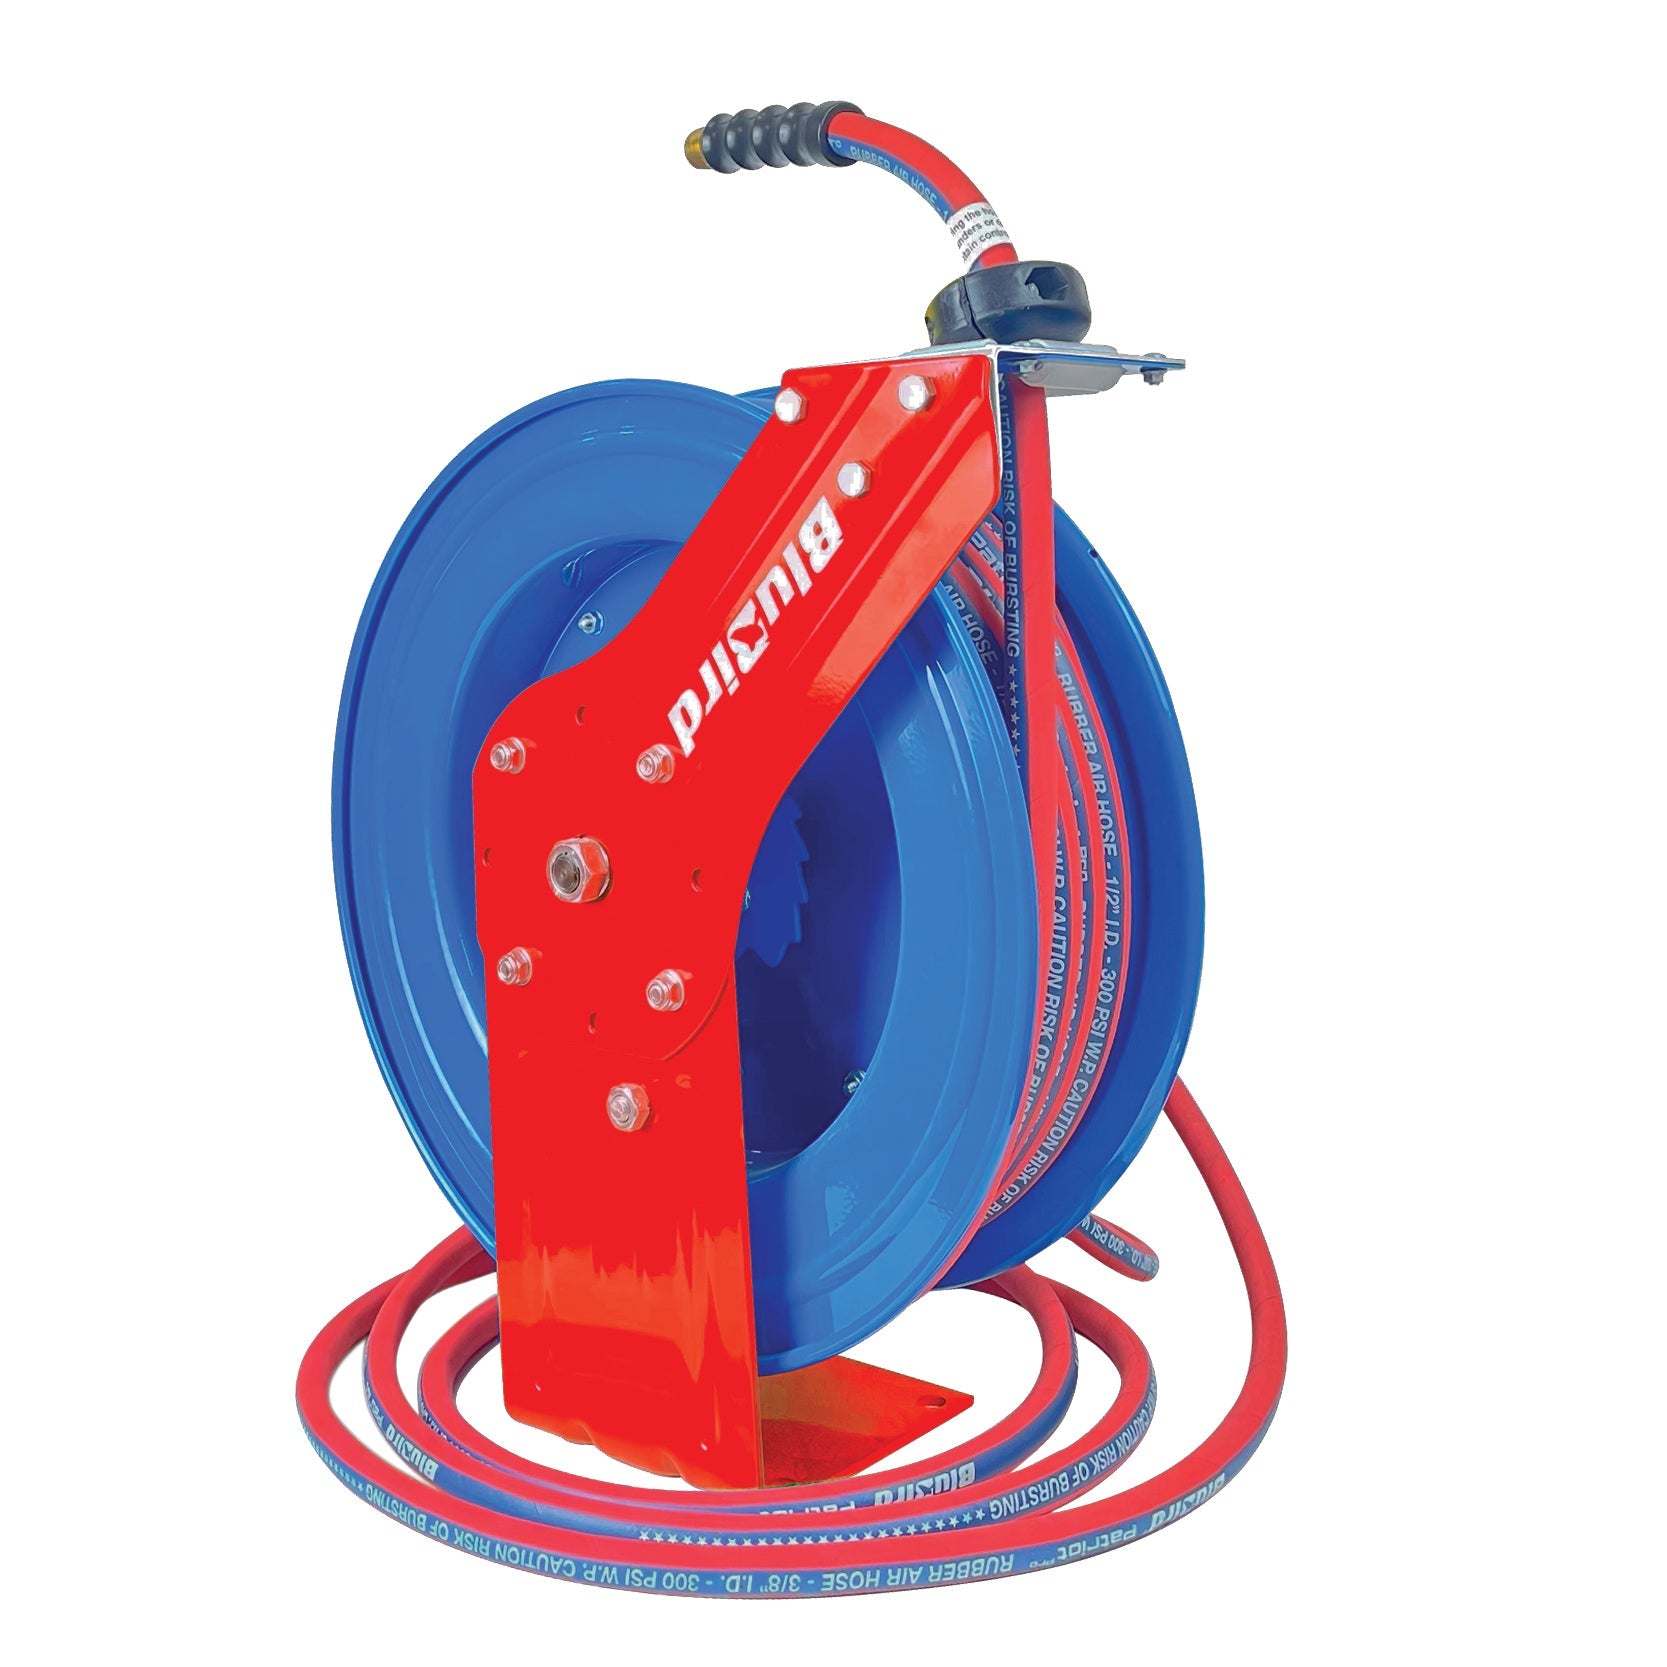 BluBird Patriot Pro Air Hose Reel 3/8 x 50' Retractable Heavy Duty Steel Construction with Rubber Hose 300 PSI